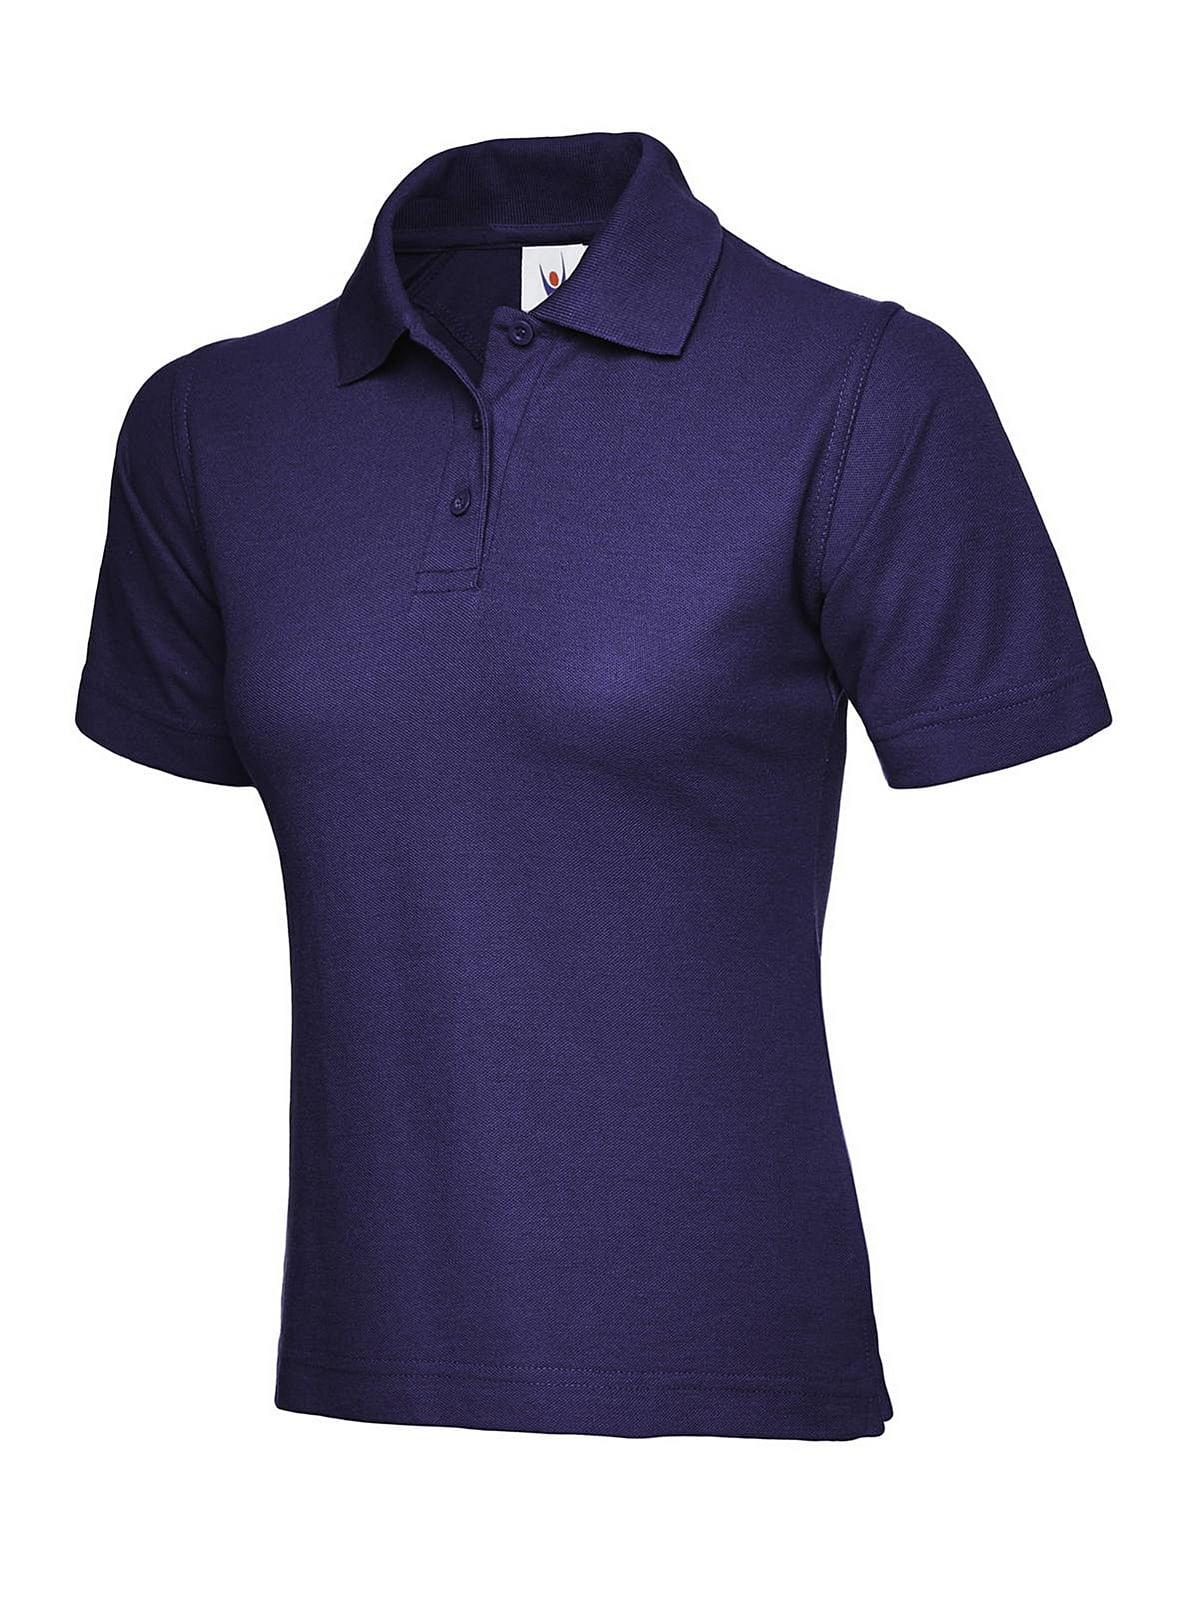 Uneek 220GSM Womens Polo Shirt in Purple (Product Code: UC106)